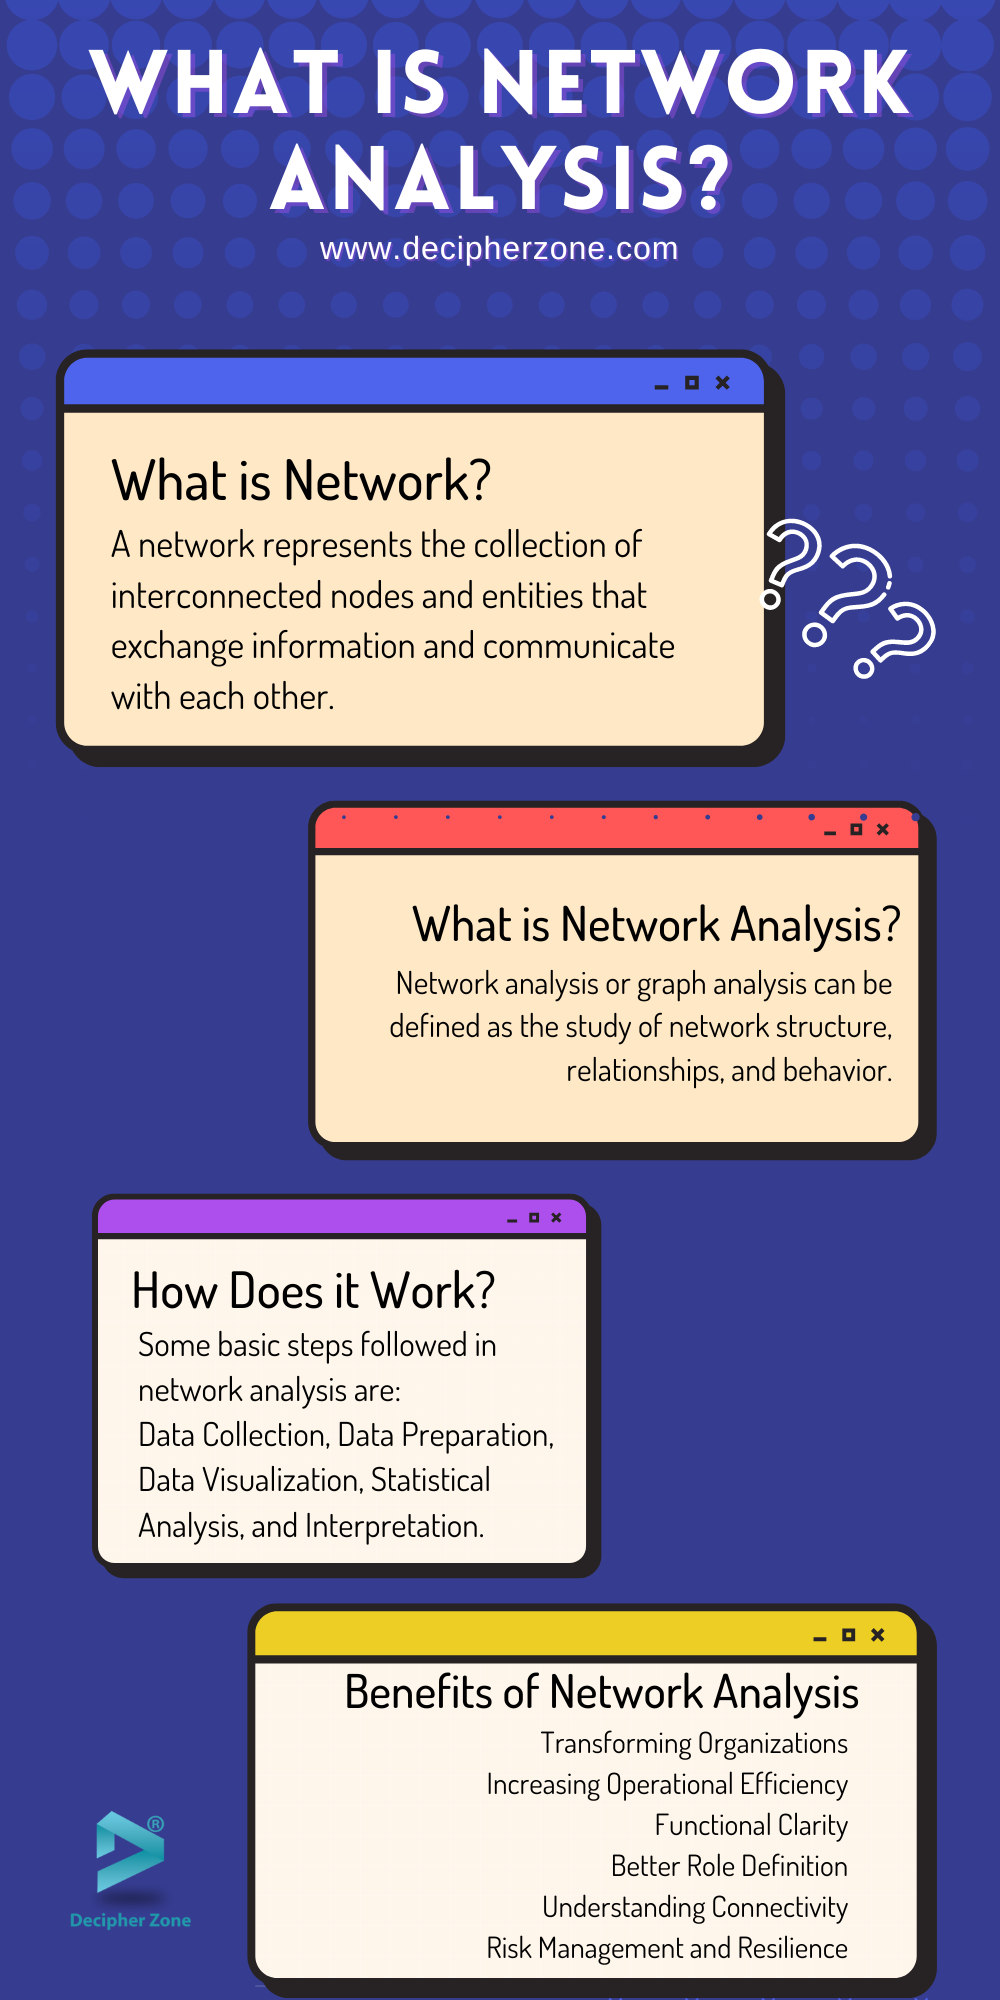 What is Network Analysis